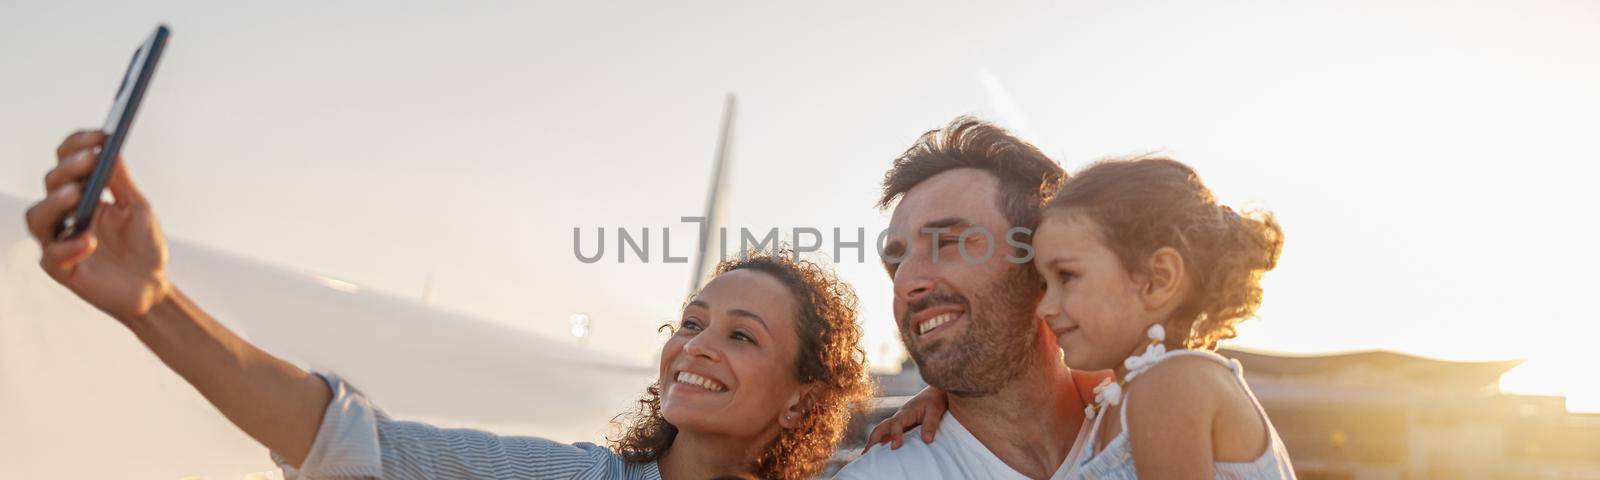 Happy tourists, beautiful family taking selfie while standing together outdoors ready for boarding the plane at sunset. Vacation, parenthood, traveling concept